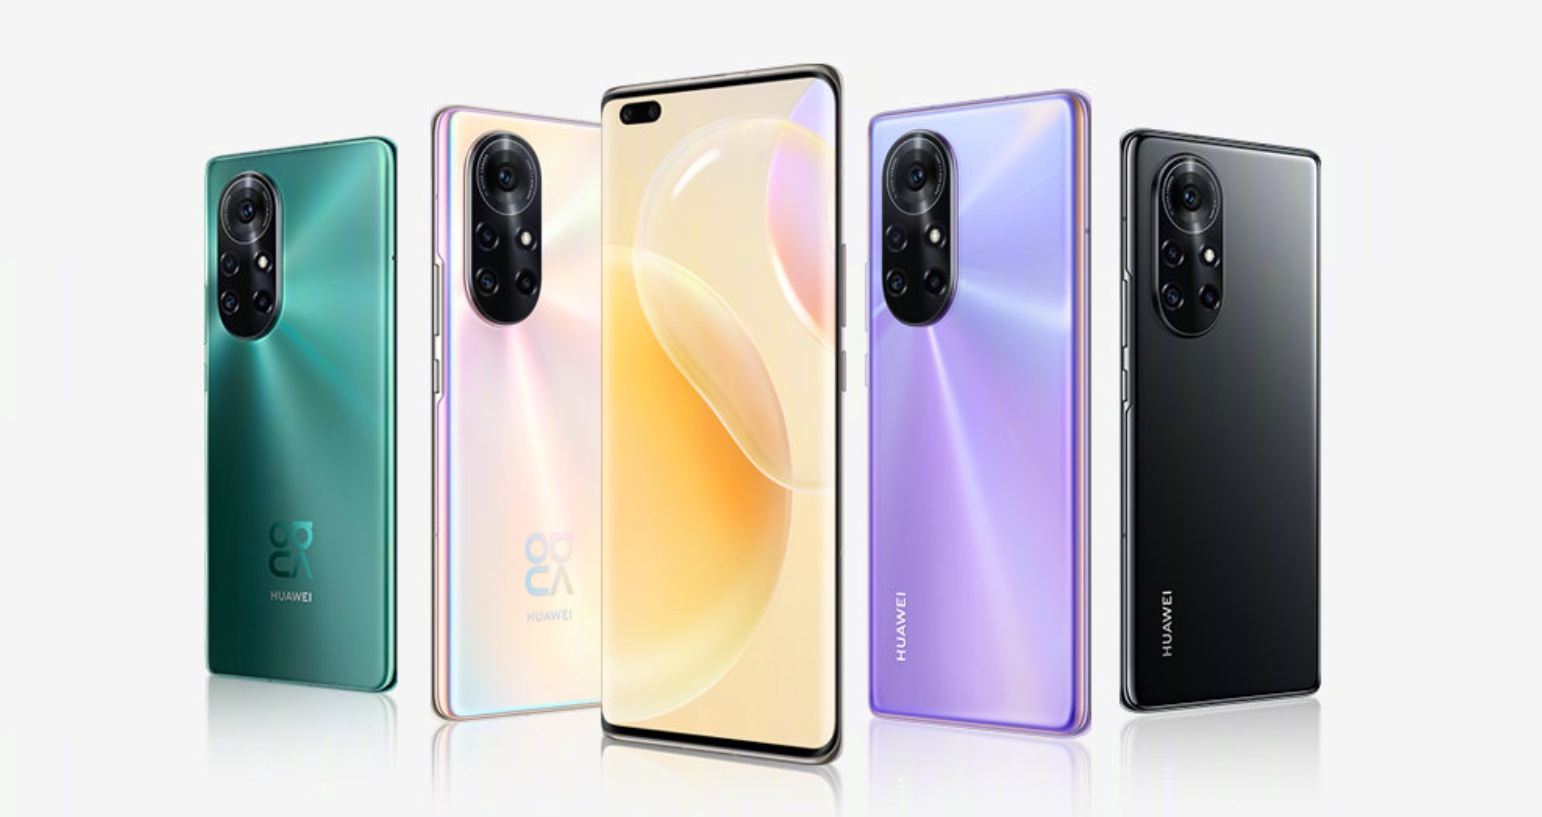 Huawei Finally Unveils the Nove 8 and Nova 8 Pro Smartphones in its Home Country